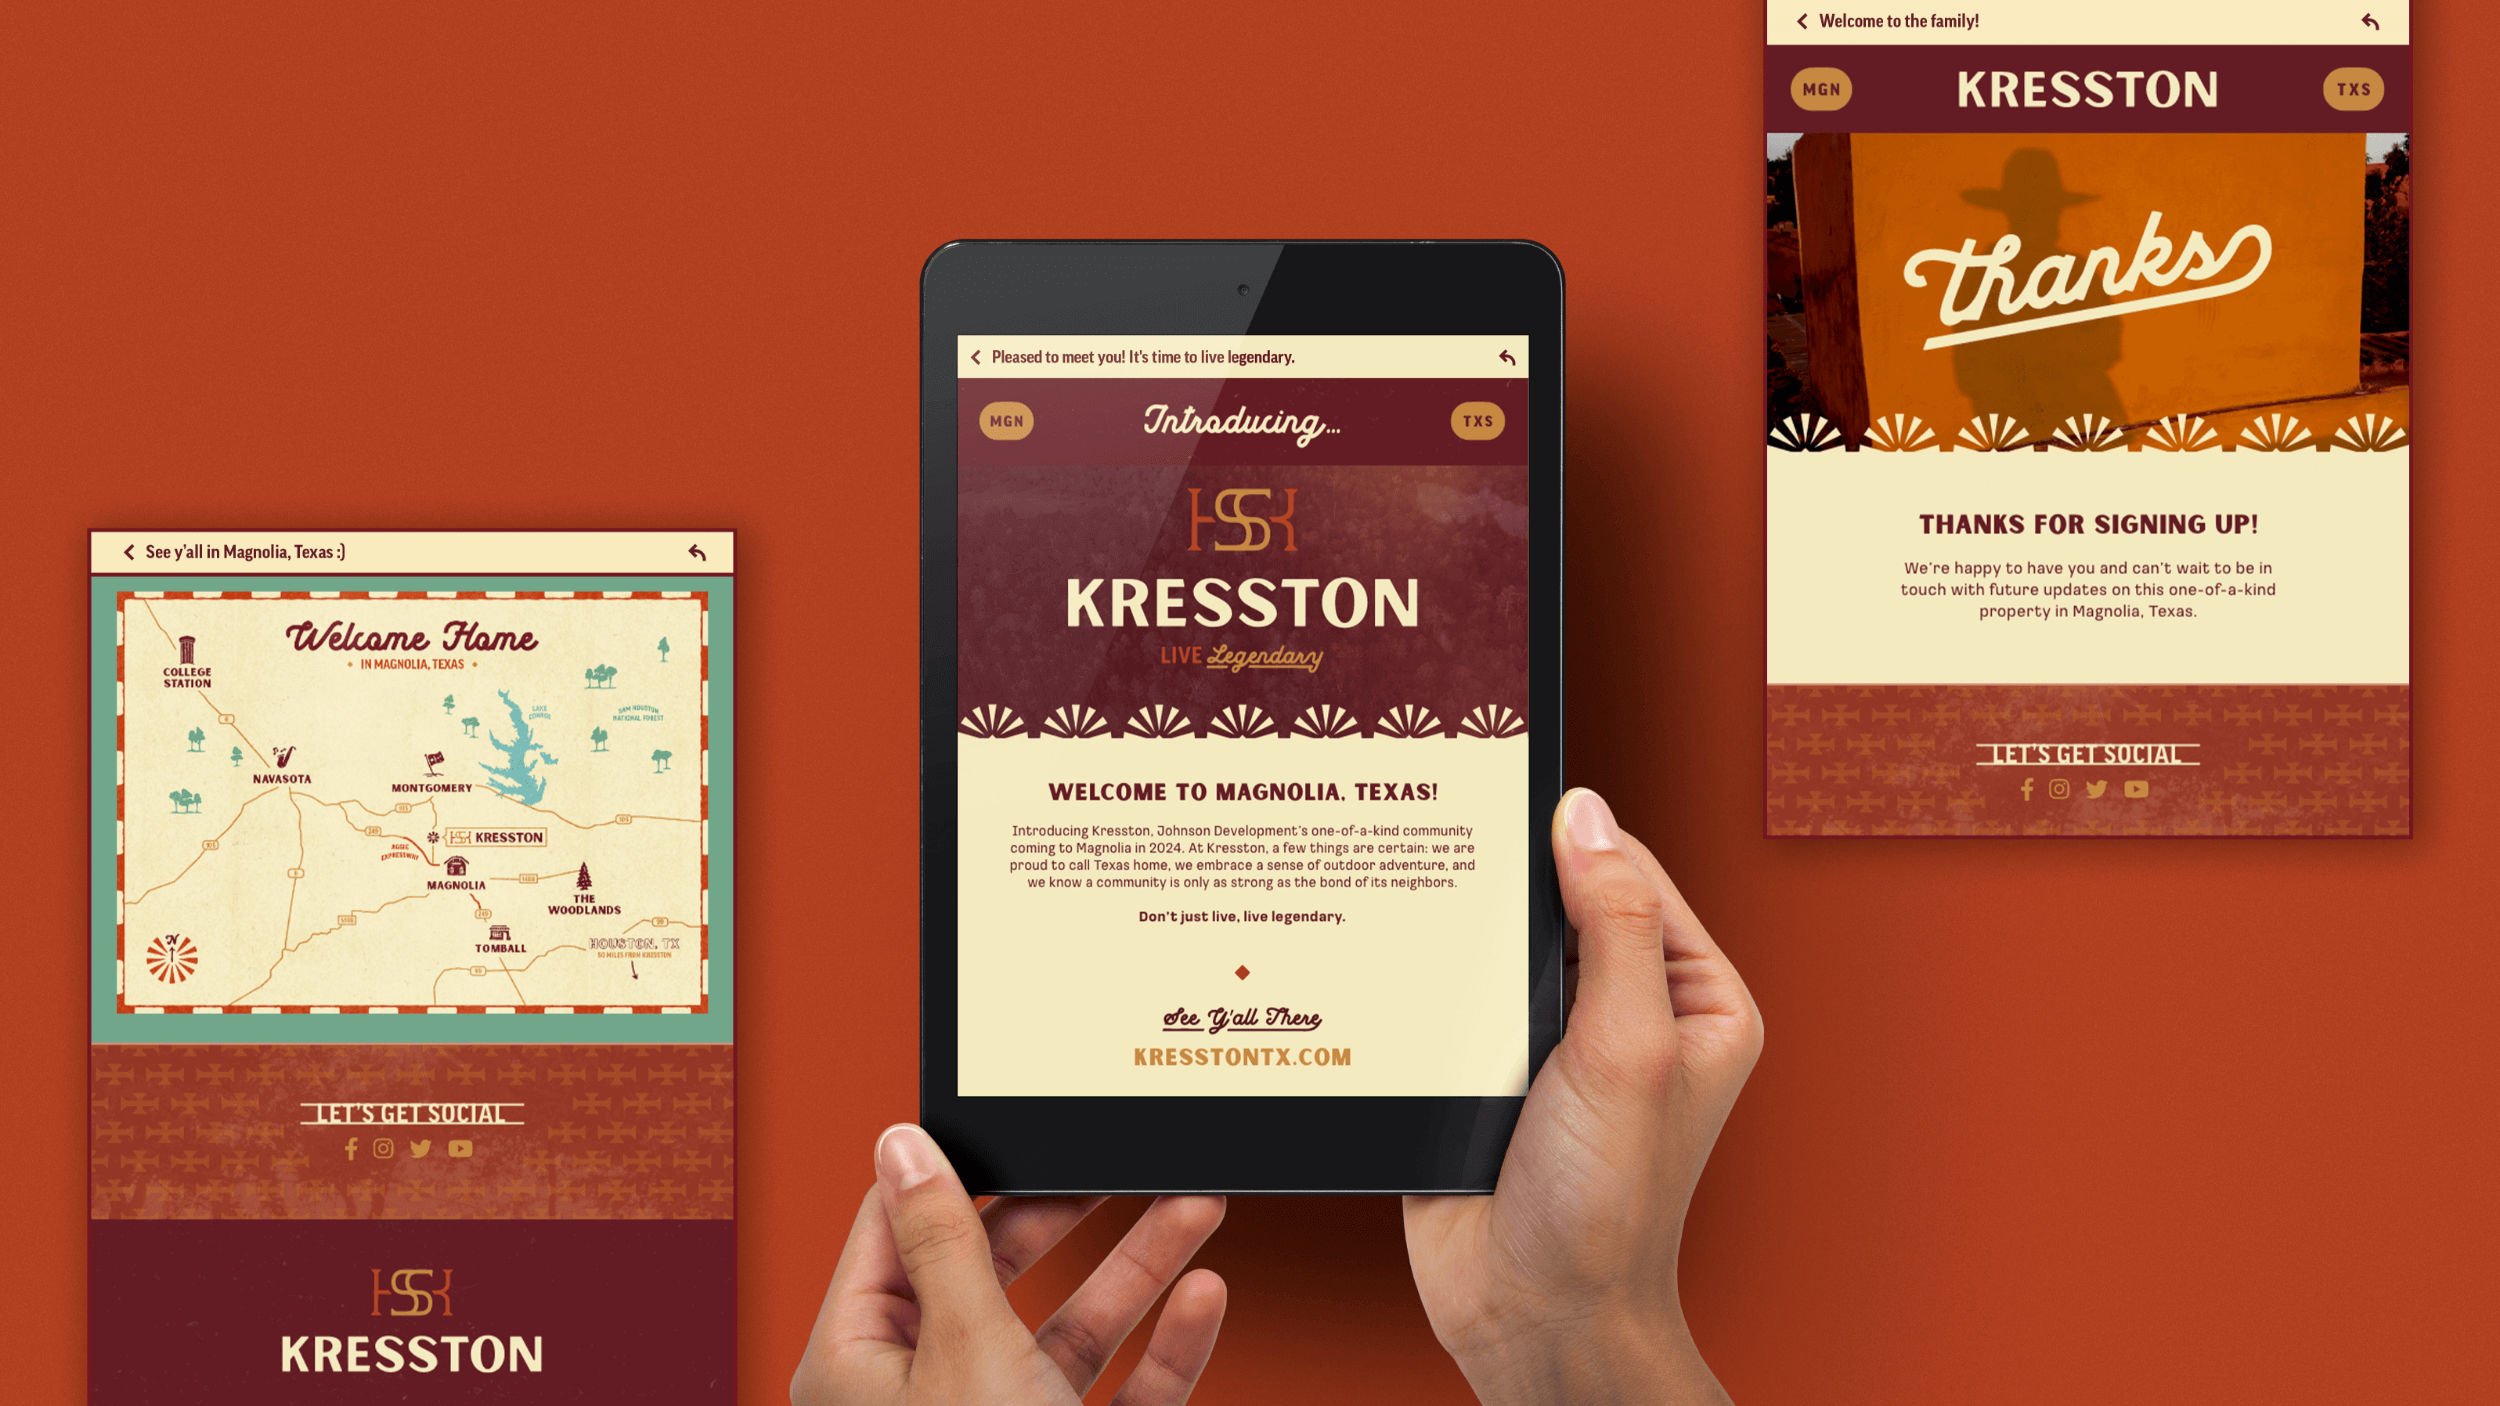 A mockup of 3 email templates show different sections designed for the Kresston brand